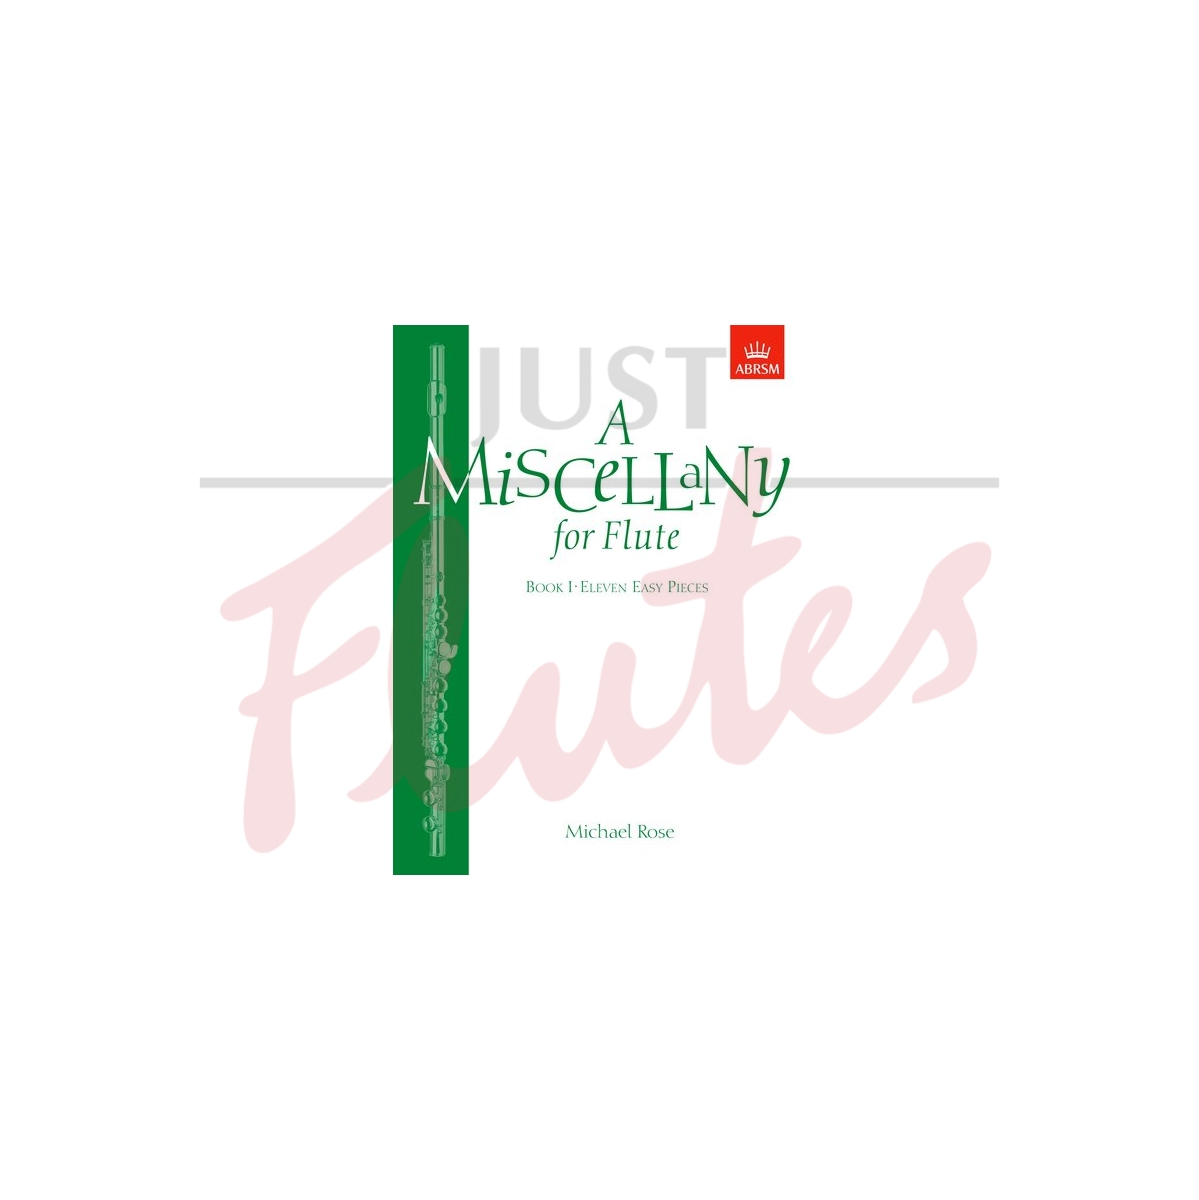 A Miscellany for Flute Book 1